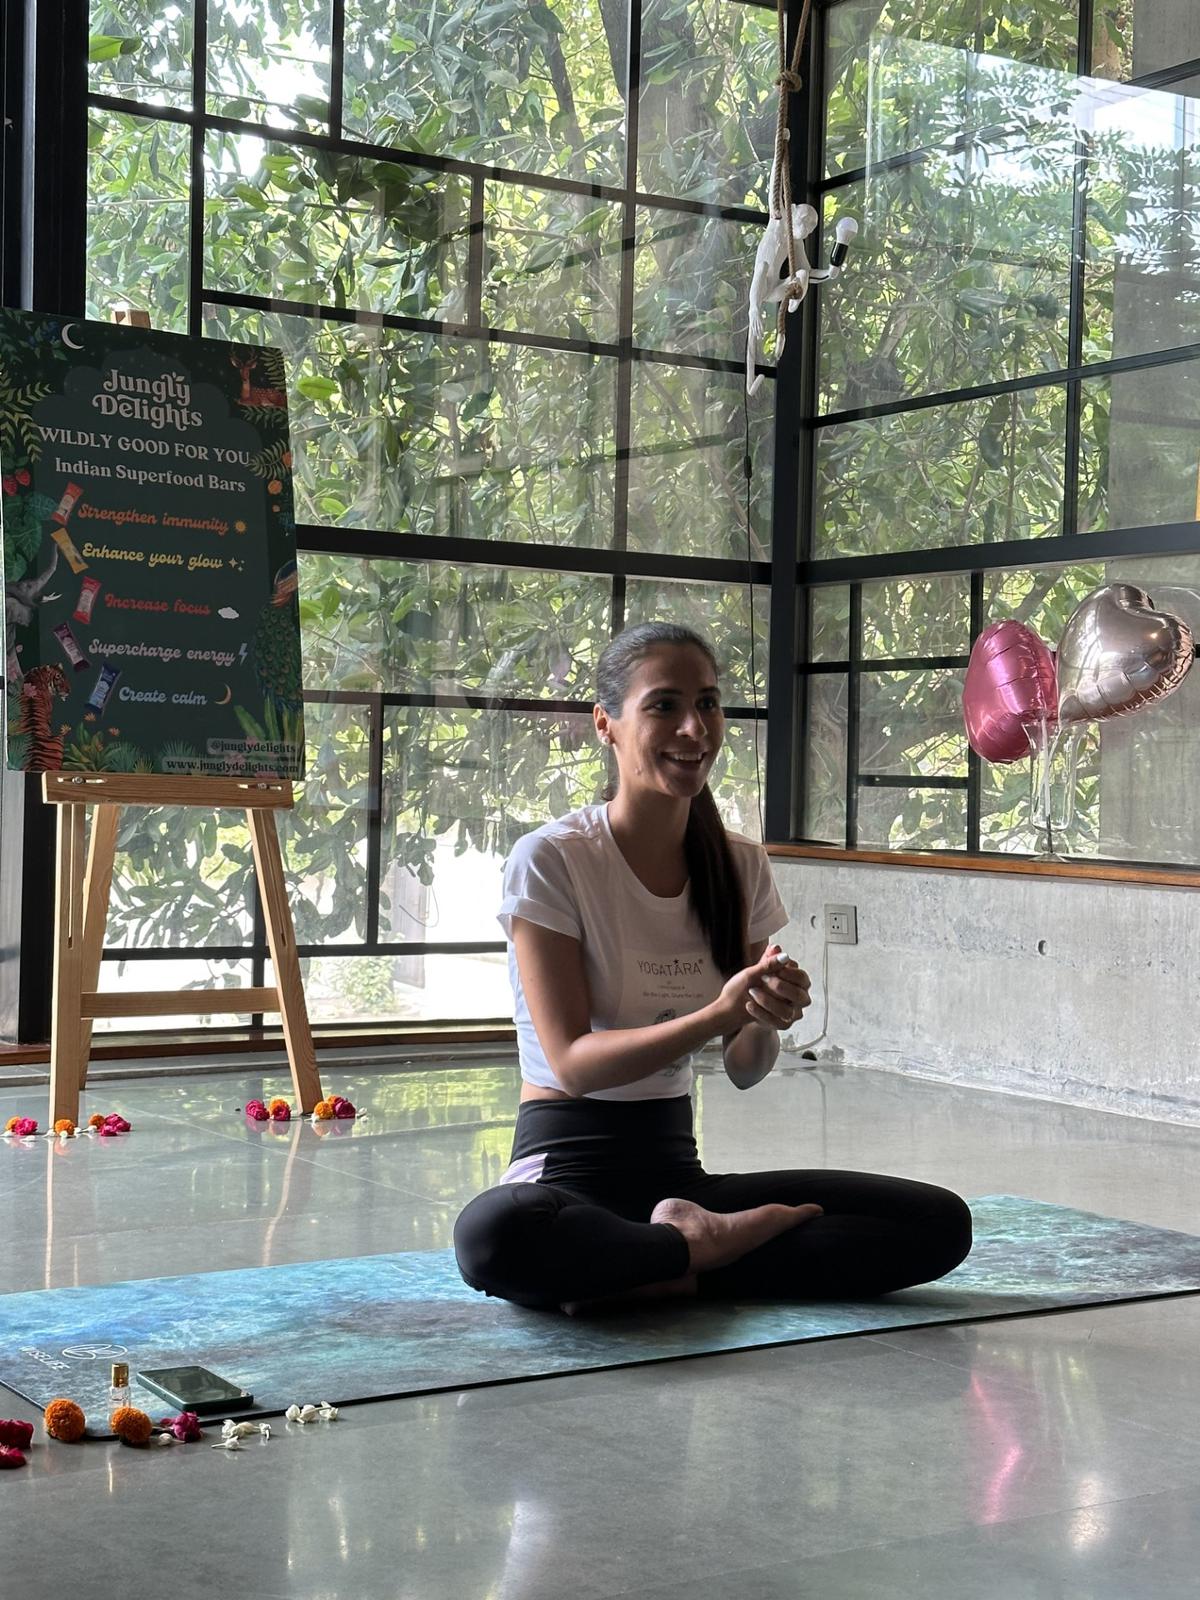 Tarini Nirula will be conducting a kids’ yoga session at the Jungly Glow Up festival.